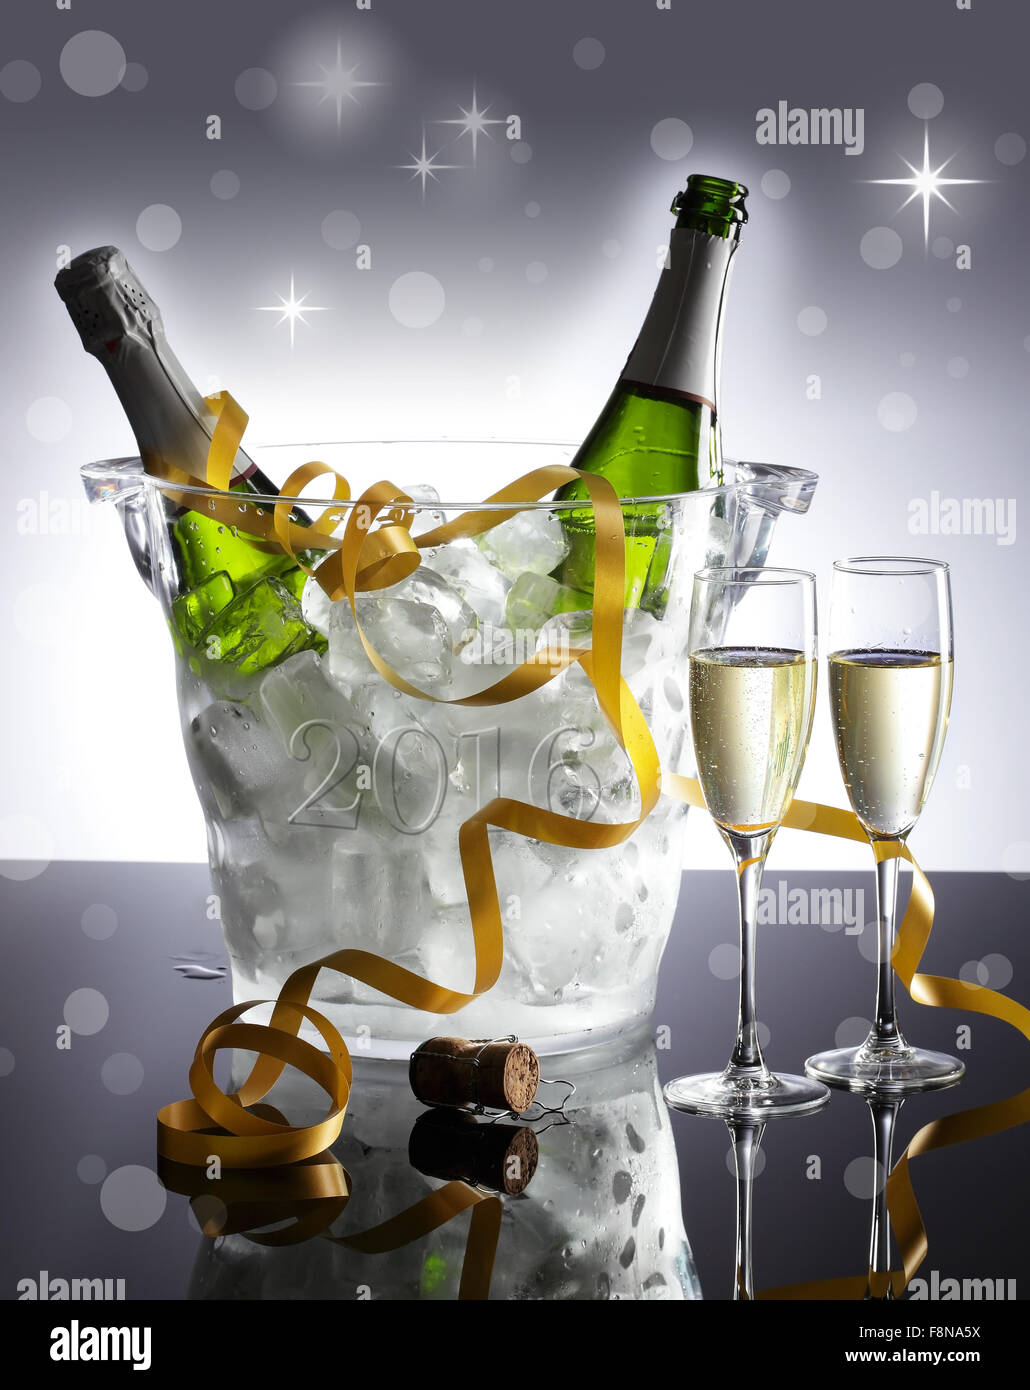 New year’s eve 2015-2016. A champagne bucket with bottles and flutes Stock Photo